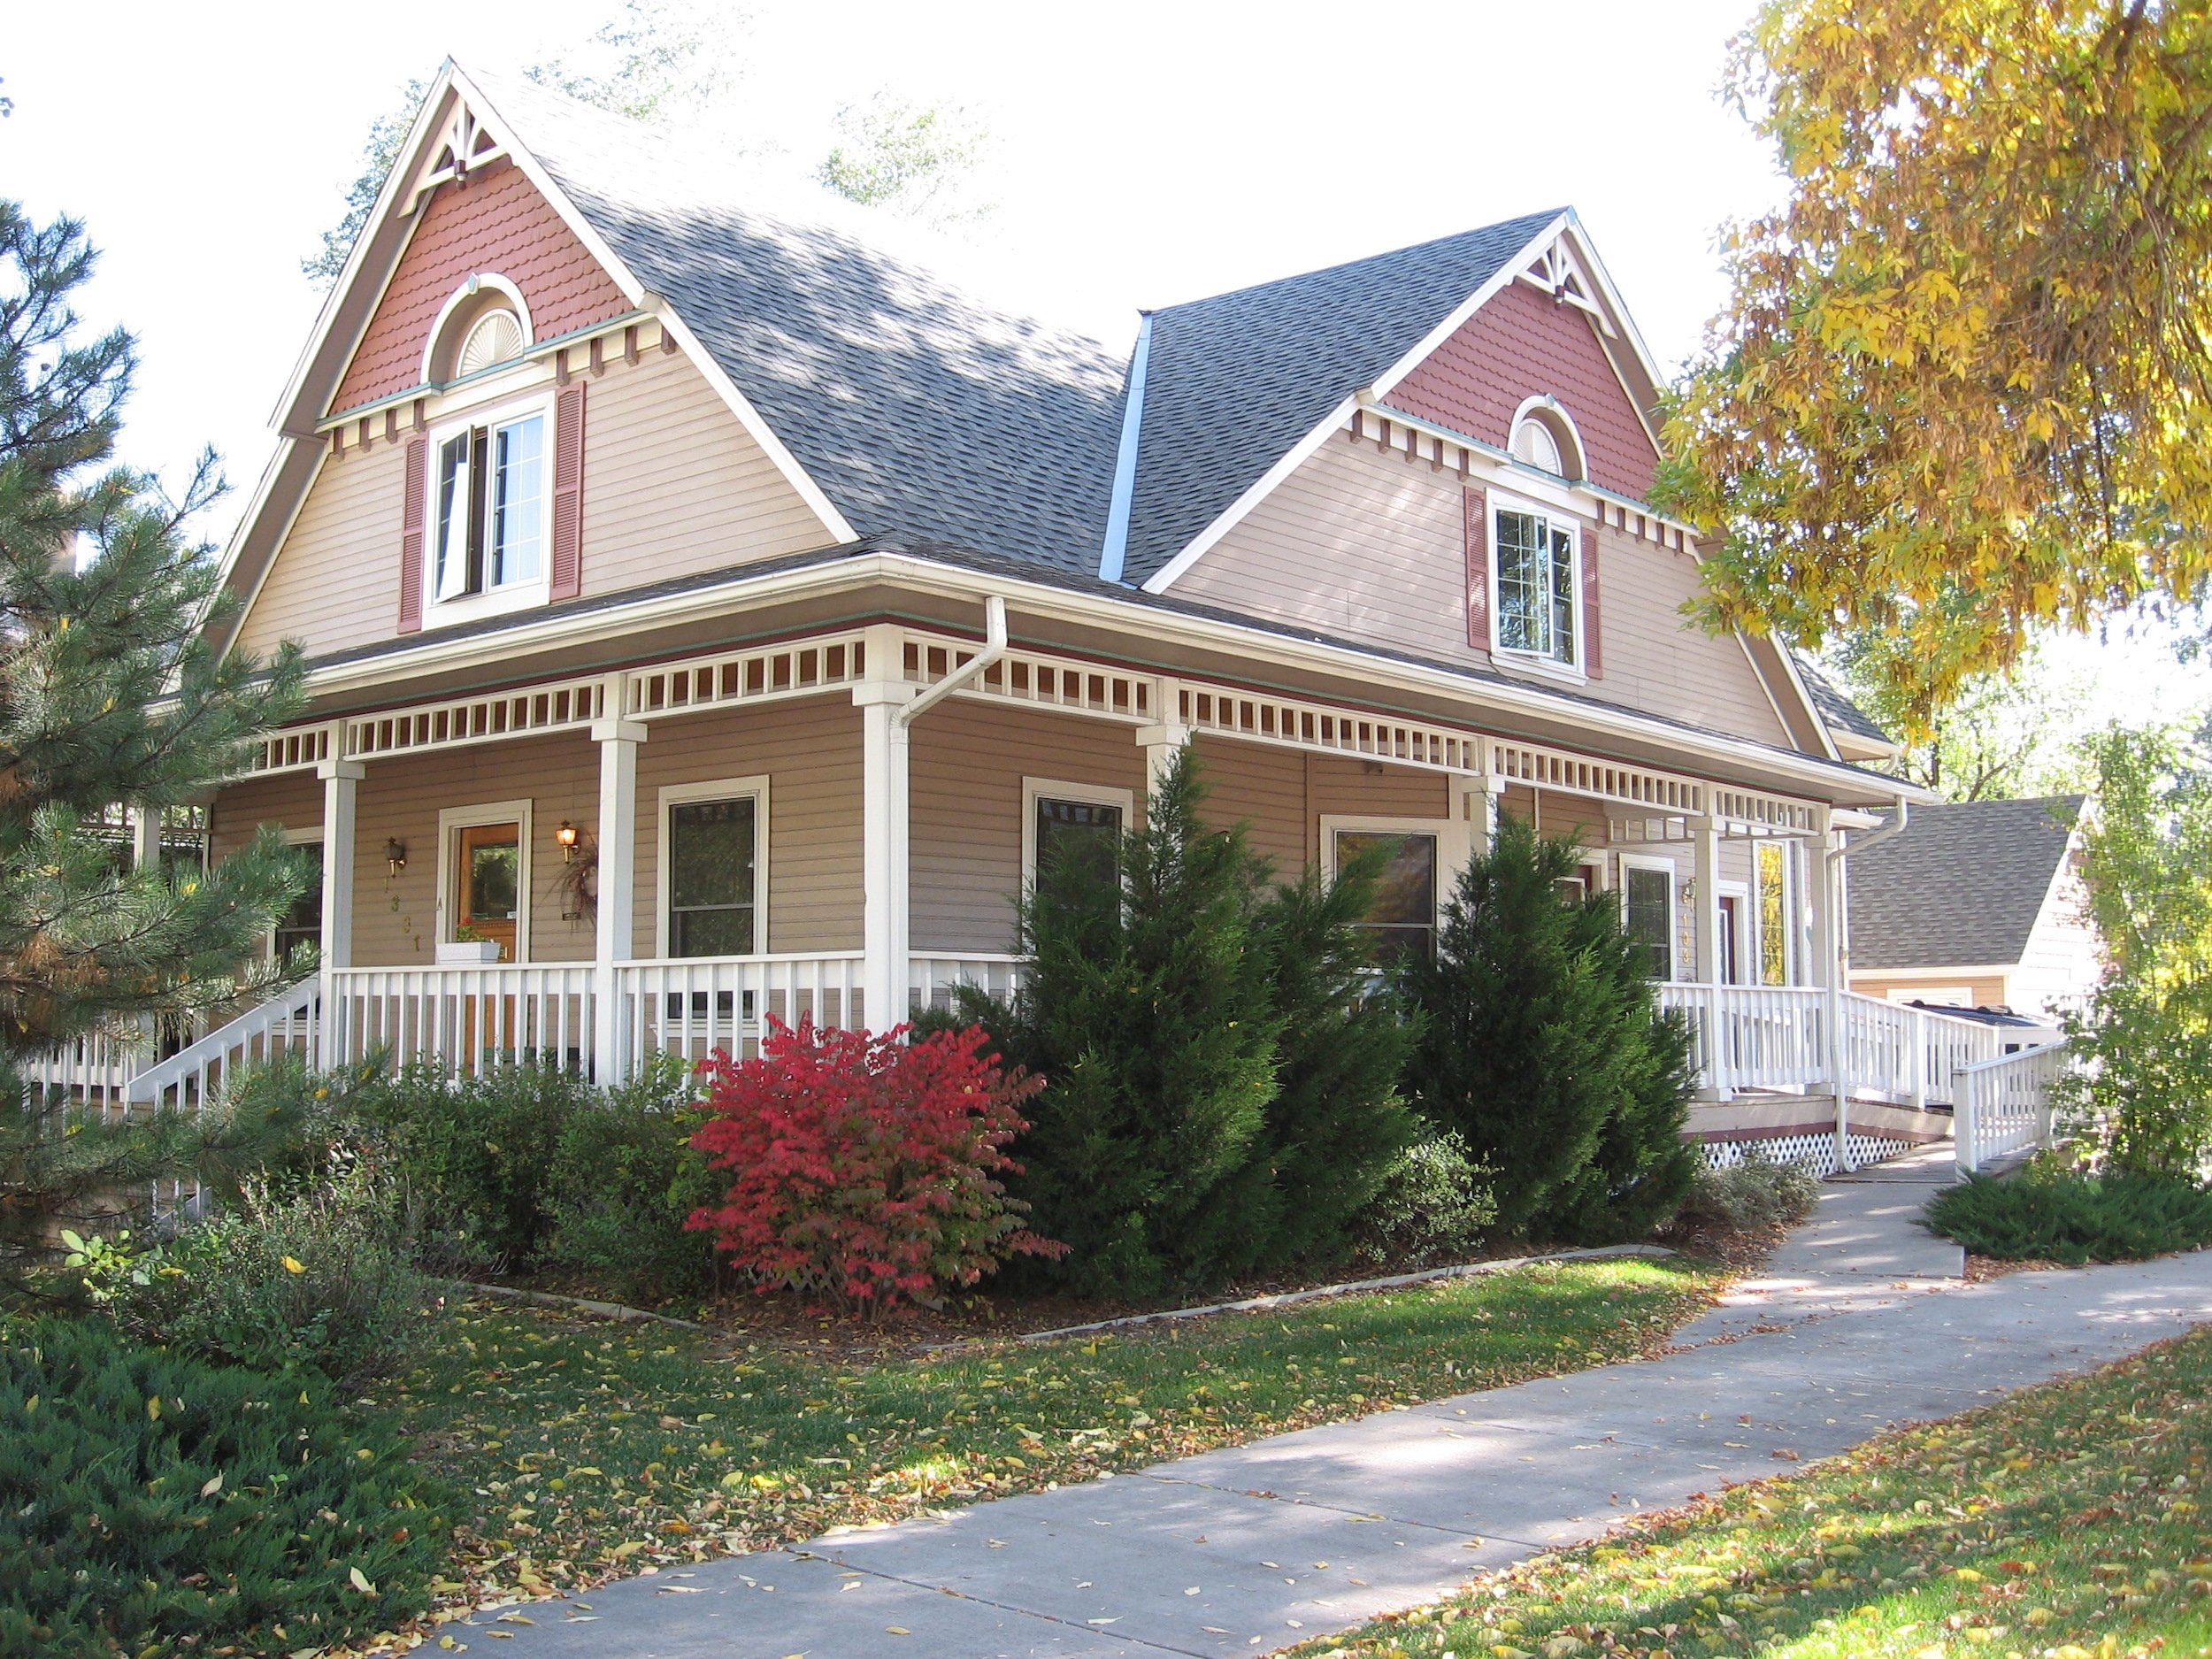 In 1998, Larry and Mary built their office on W. Colorado Avenue, designed in the Victorian style to match the neighborhood.